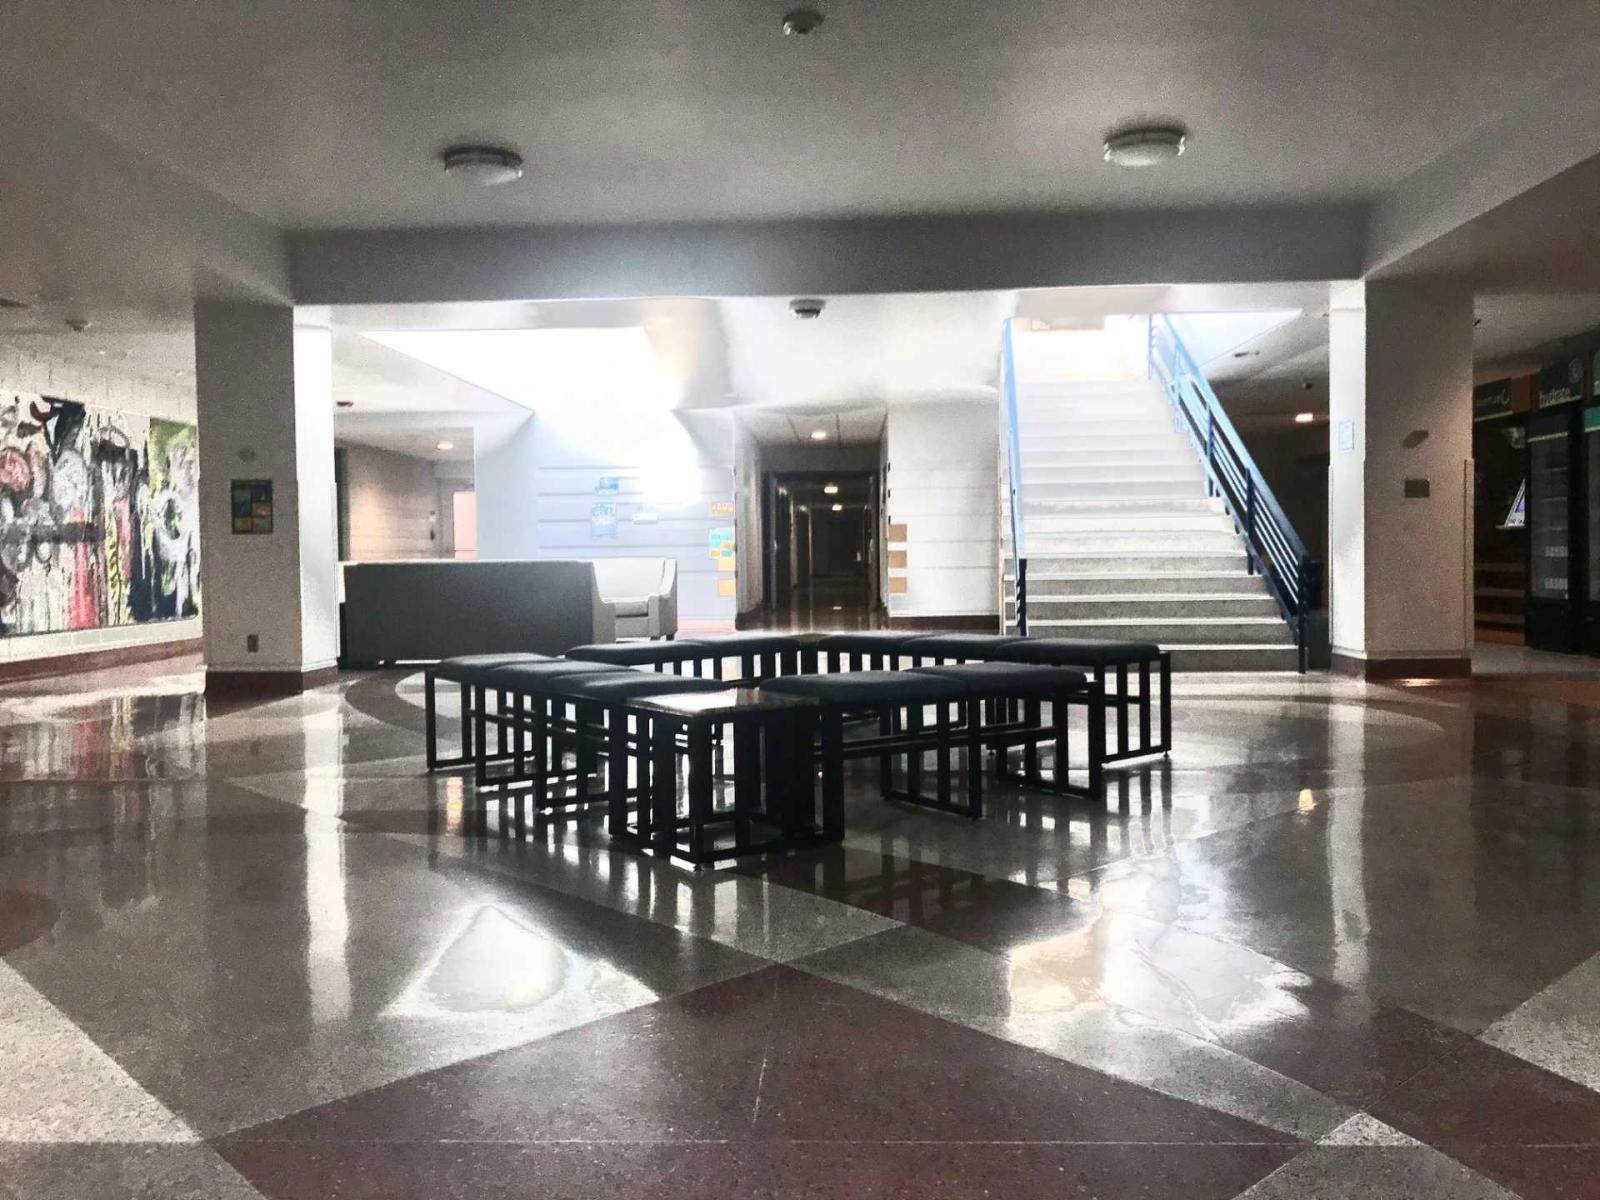 Pile of black benches in the middle of a lobby inside the Conservatory of Music building.